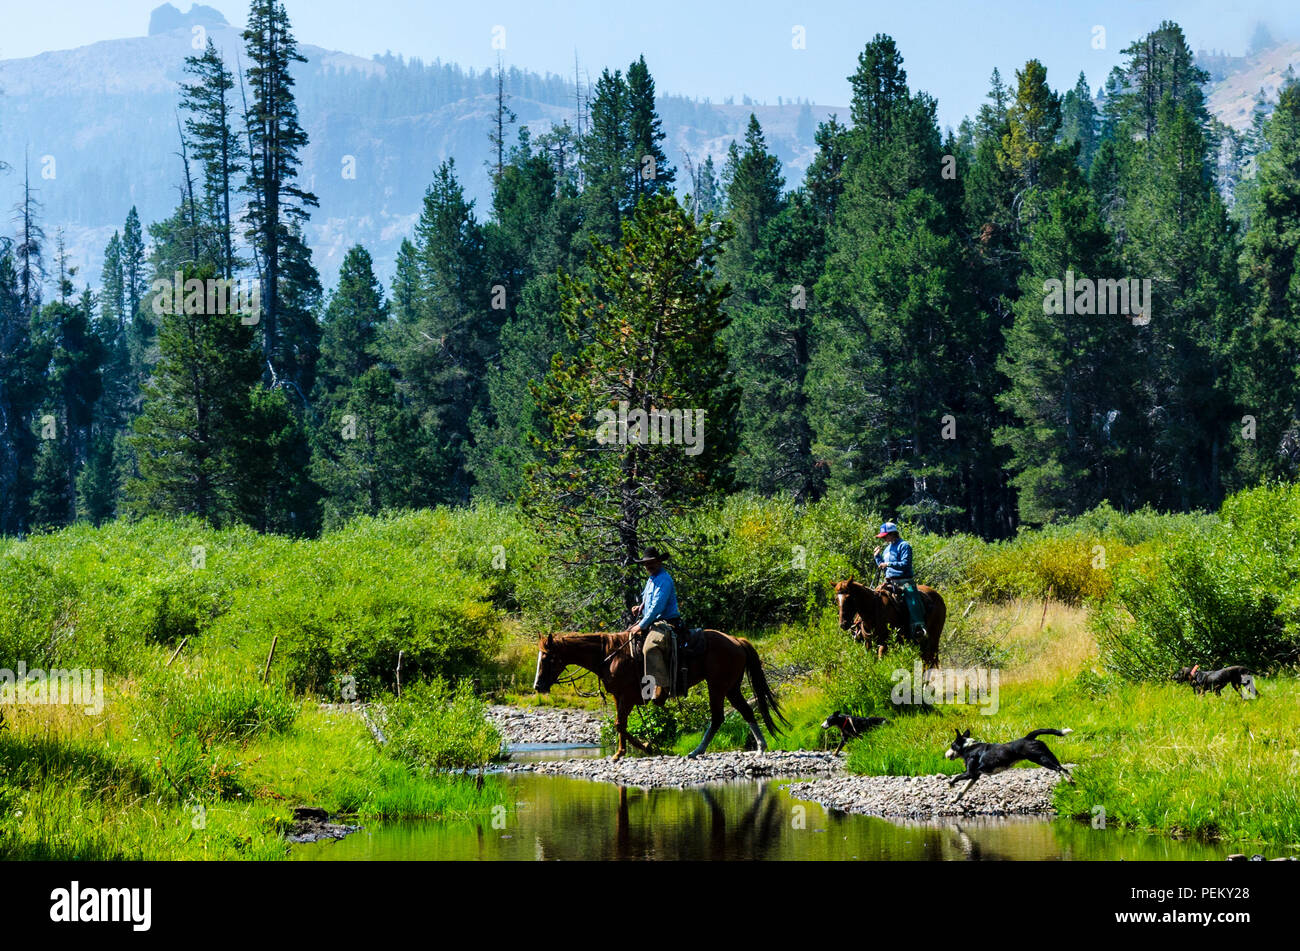 Cowboys rounding up cattle due to an evacuation order for the Eagle Meadow road area of the Stanislaus National Forest California Stock Photo